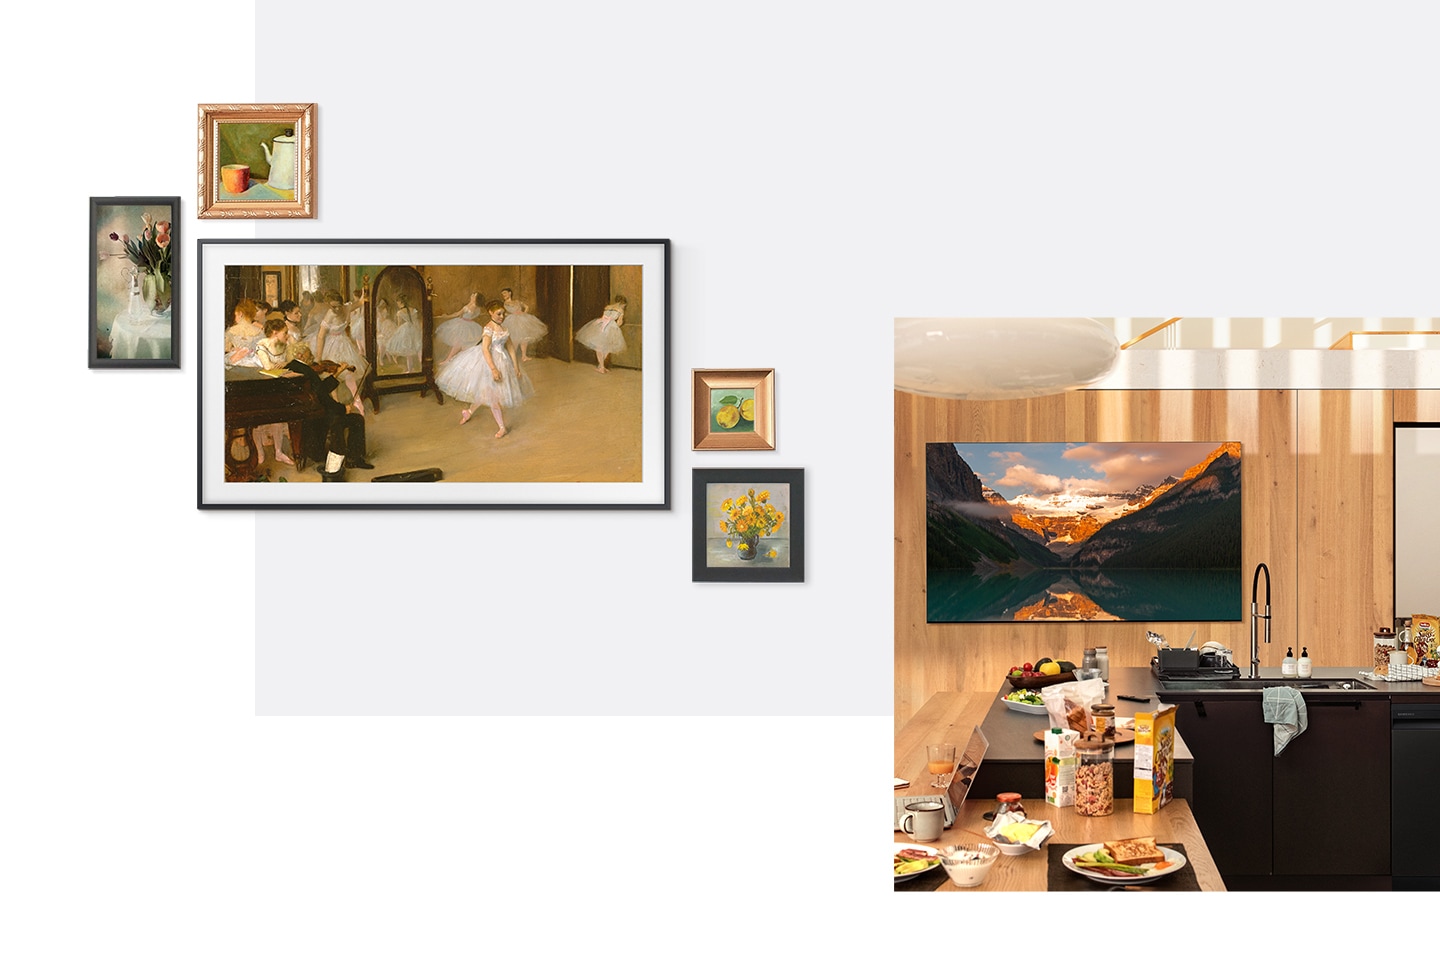 Four small paintings are arranged around a Frame TV hung on a wall with ballerinas dancing in a studio onscreen. Next to this, a TV with a landscape background on its display hangs on the wooden wall of a modern kitchen. Various foods and dishes are on the kitchen counter next to a sink.